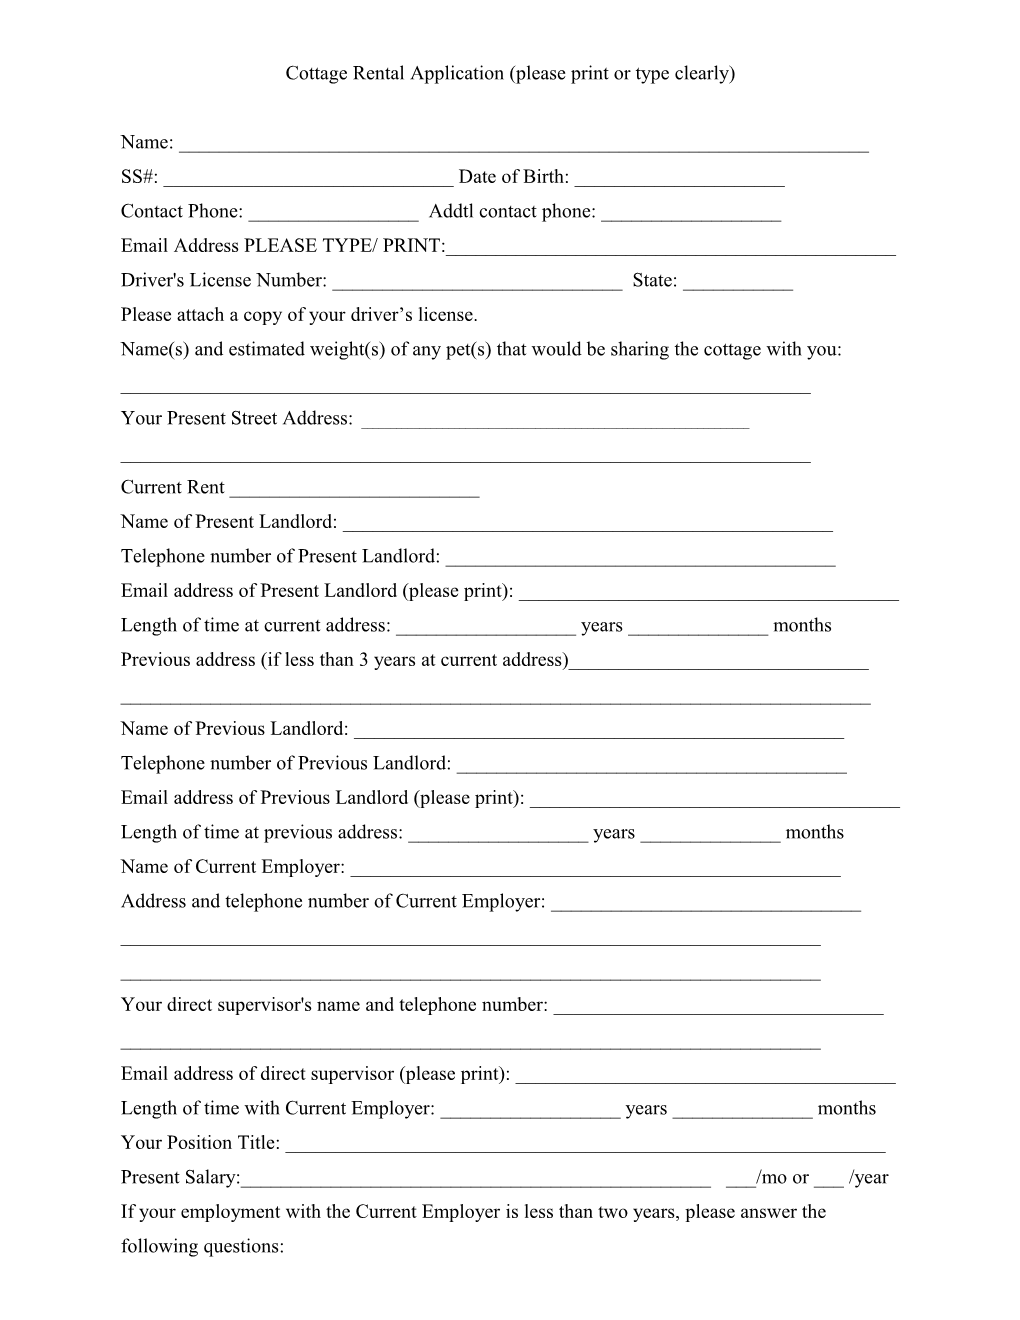 Rental Application (Please Print Clearly)